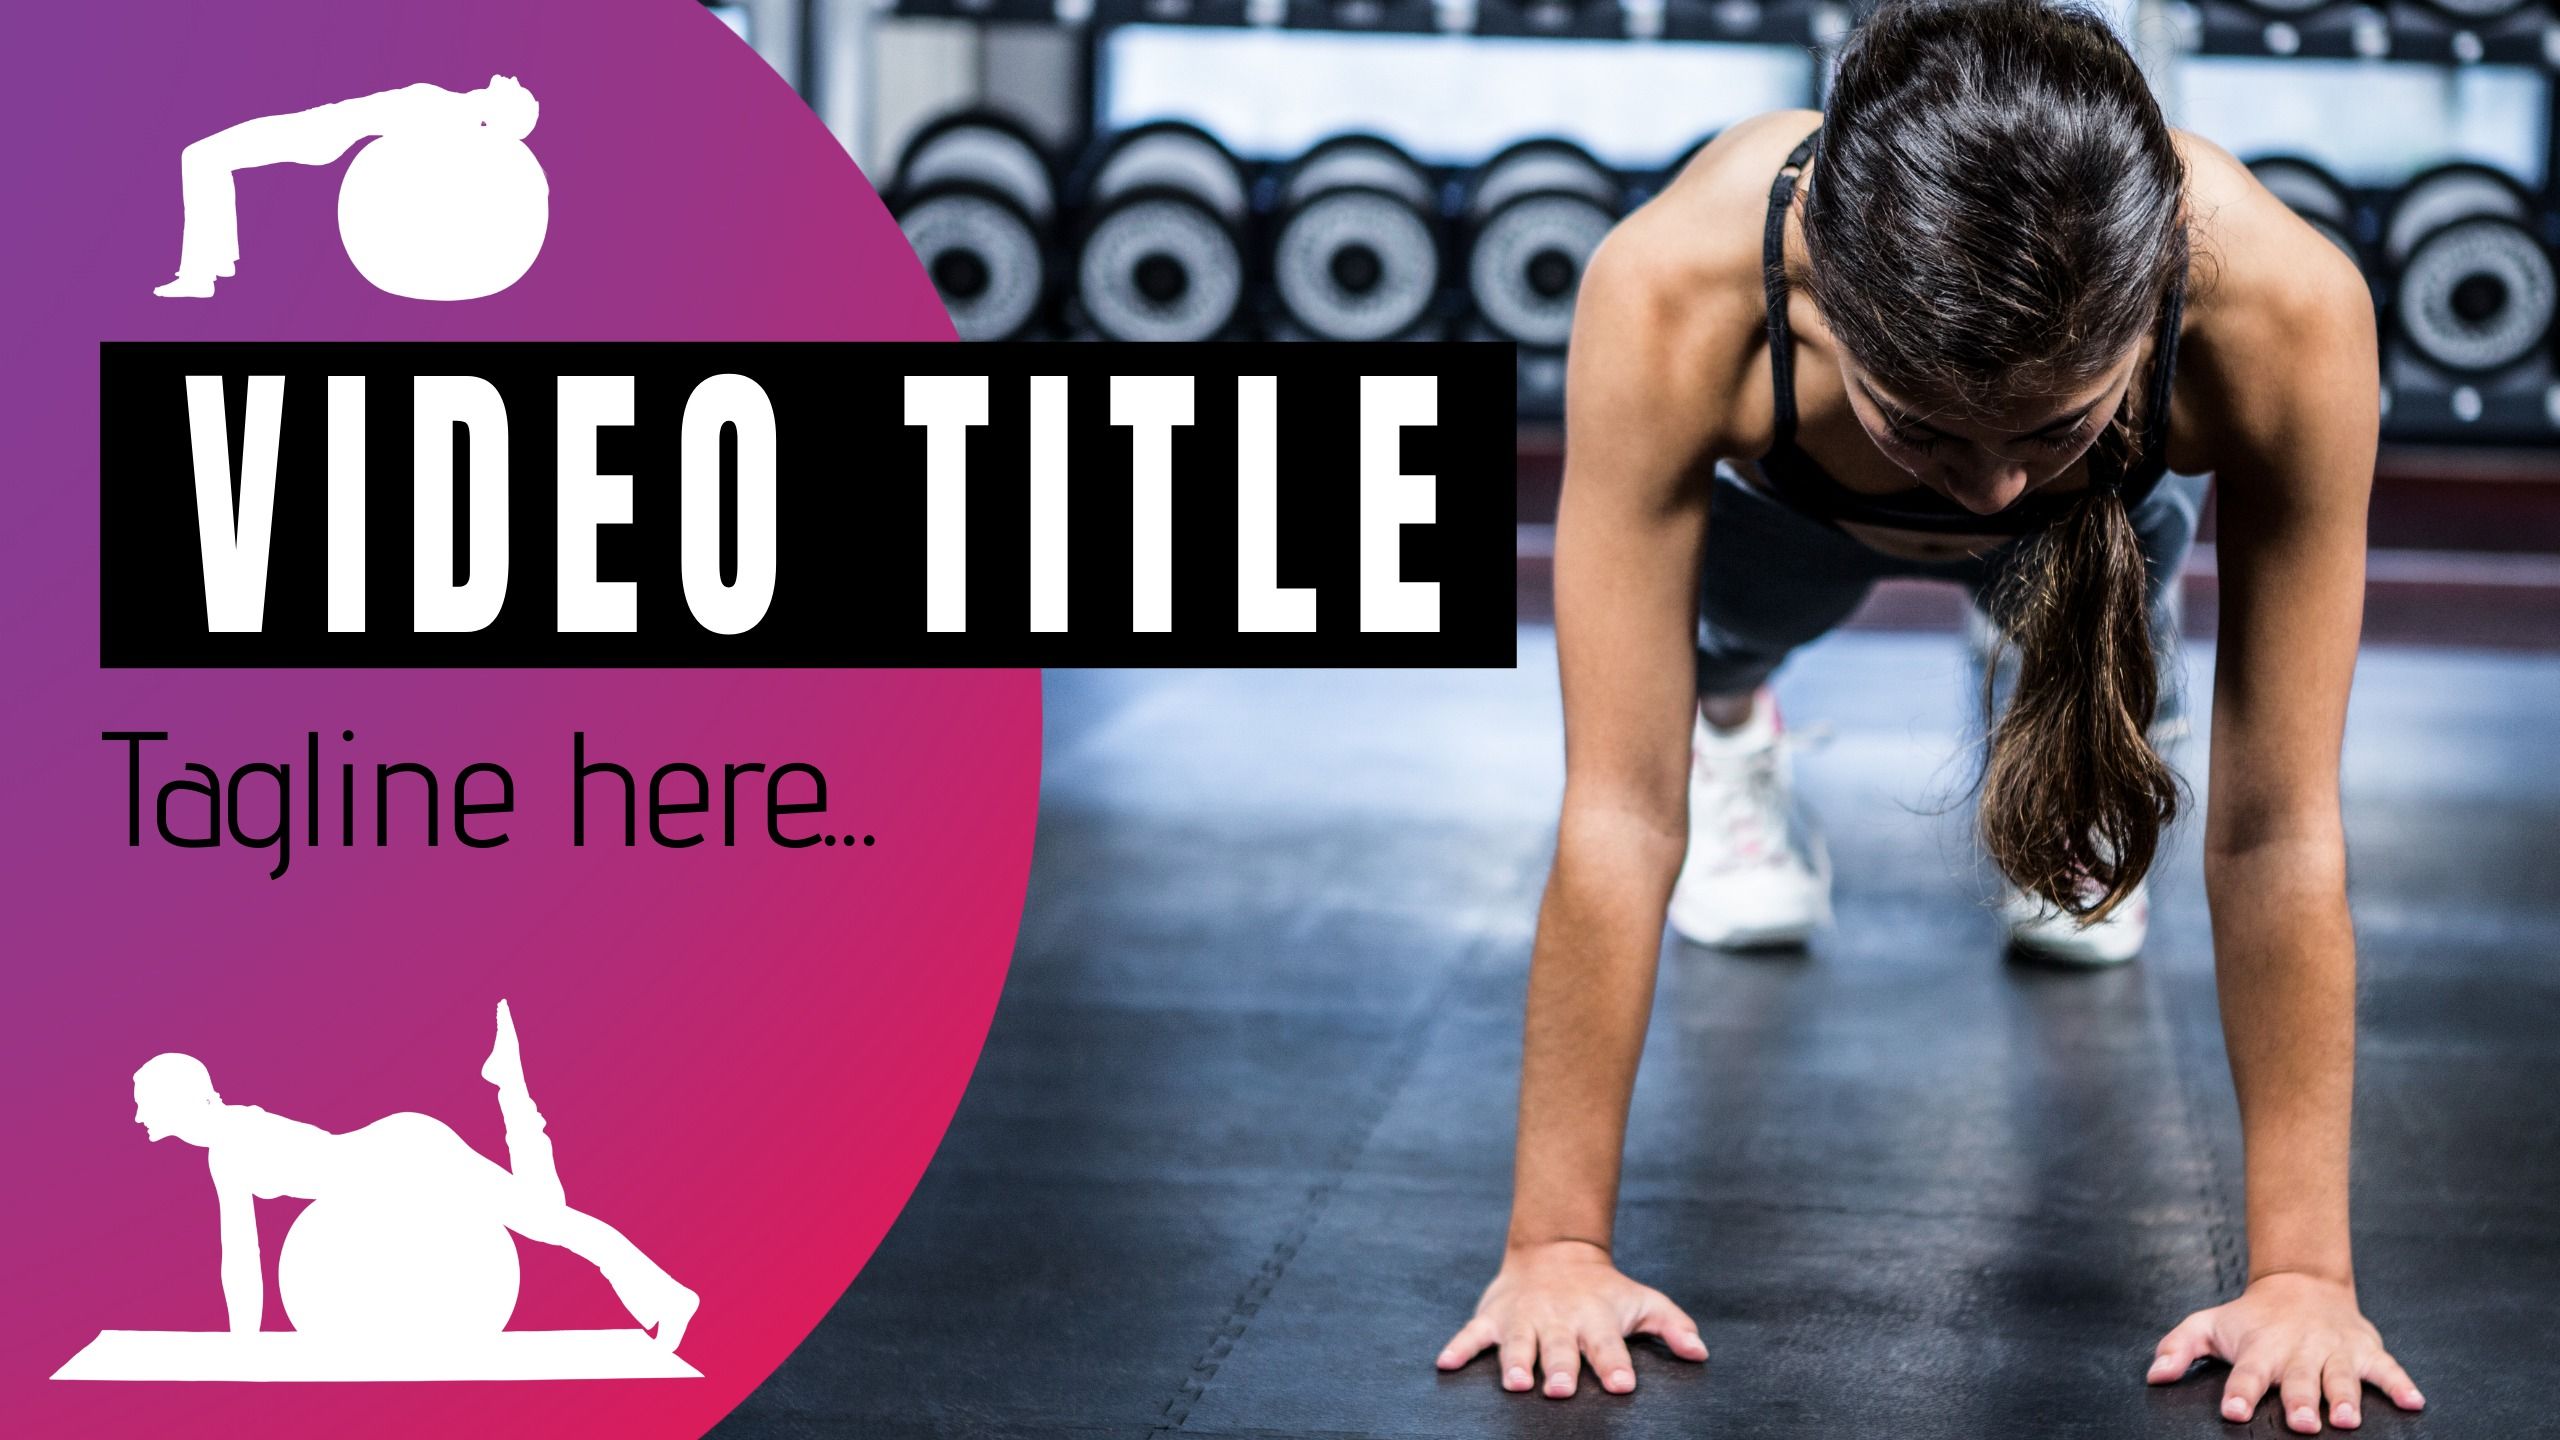 Workout video thumbnail template - Step-by-step guide to designing YouTube thumbnails - Image